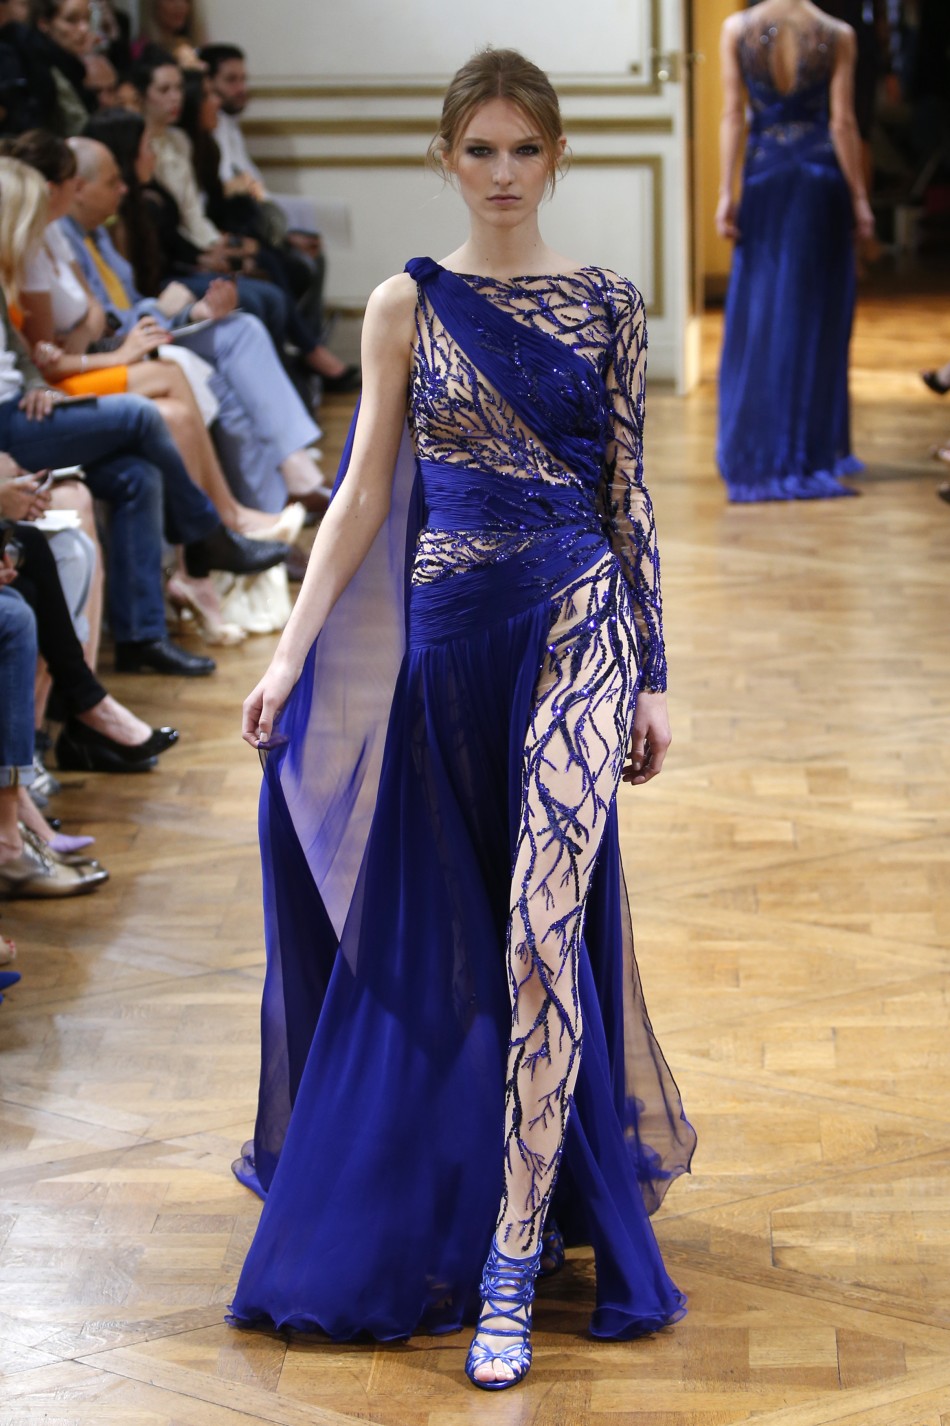 A high-end electric blue evening gown